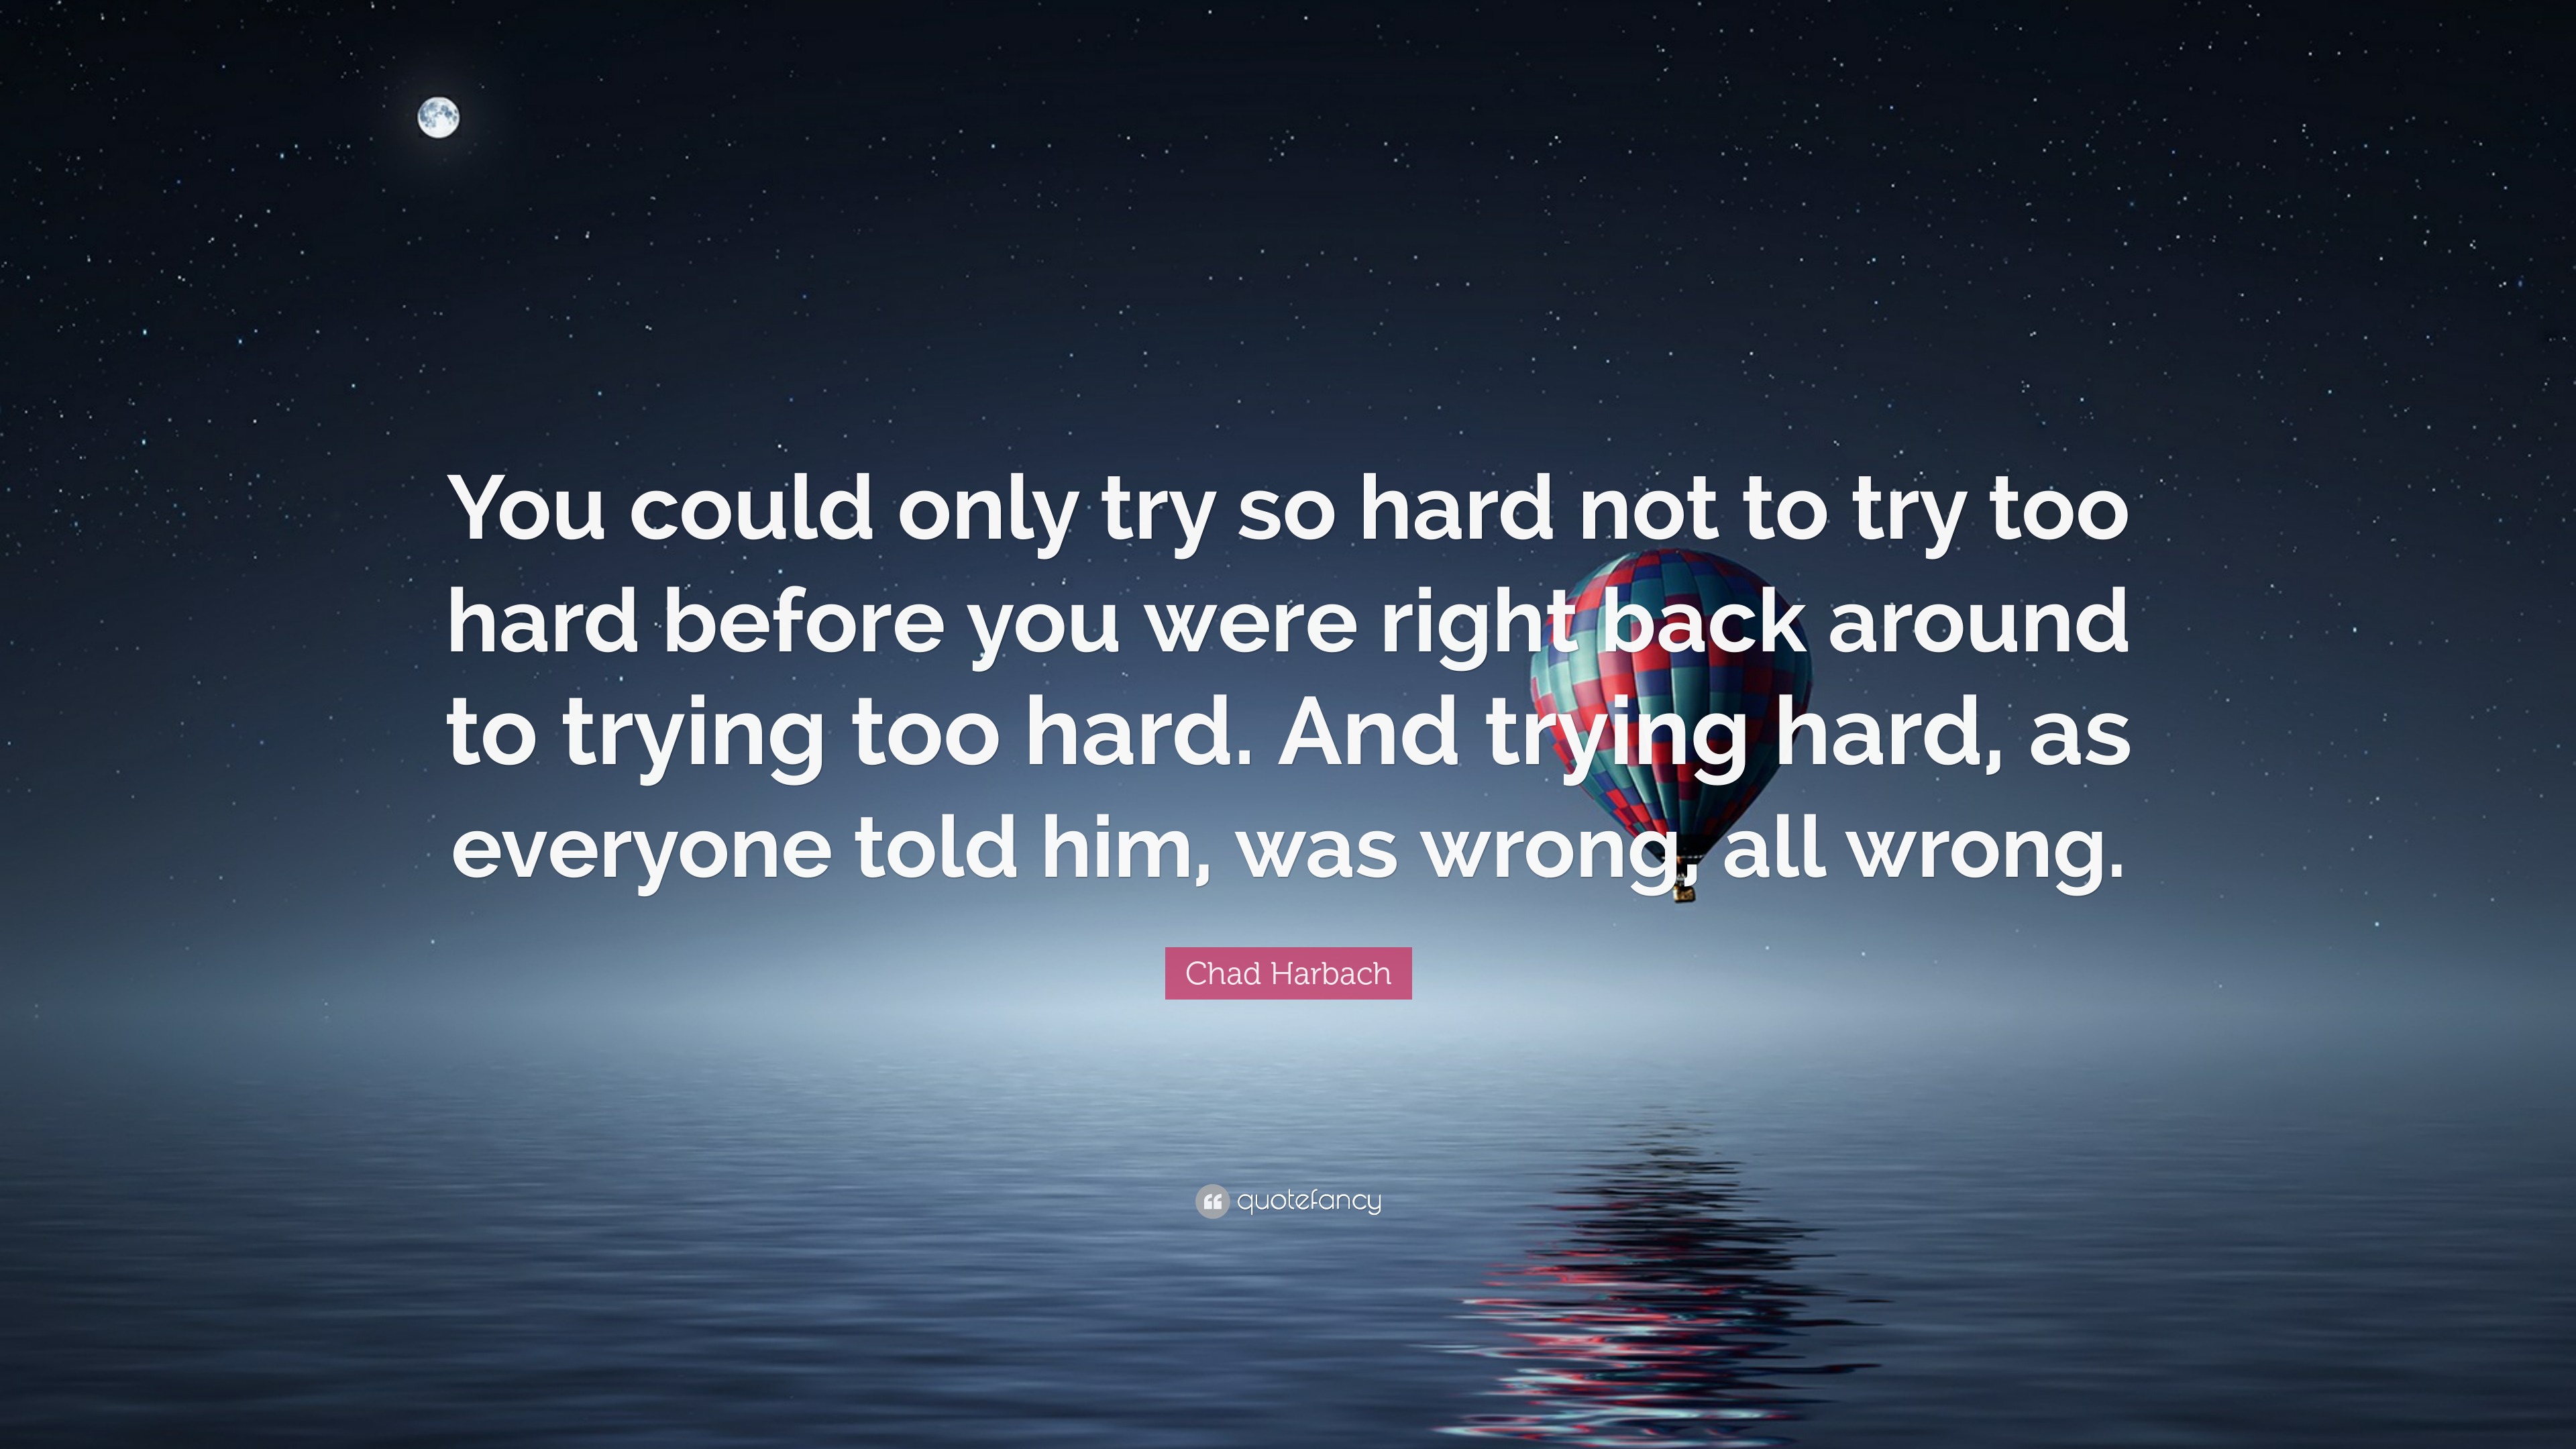 Chad Harbach Quote: “You could only try so hard not to try too